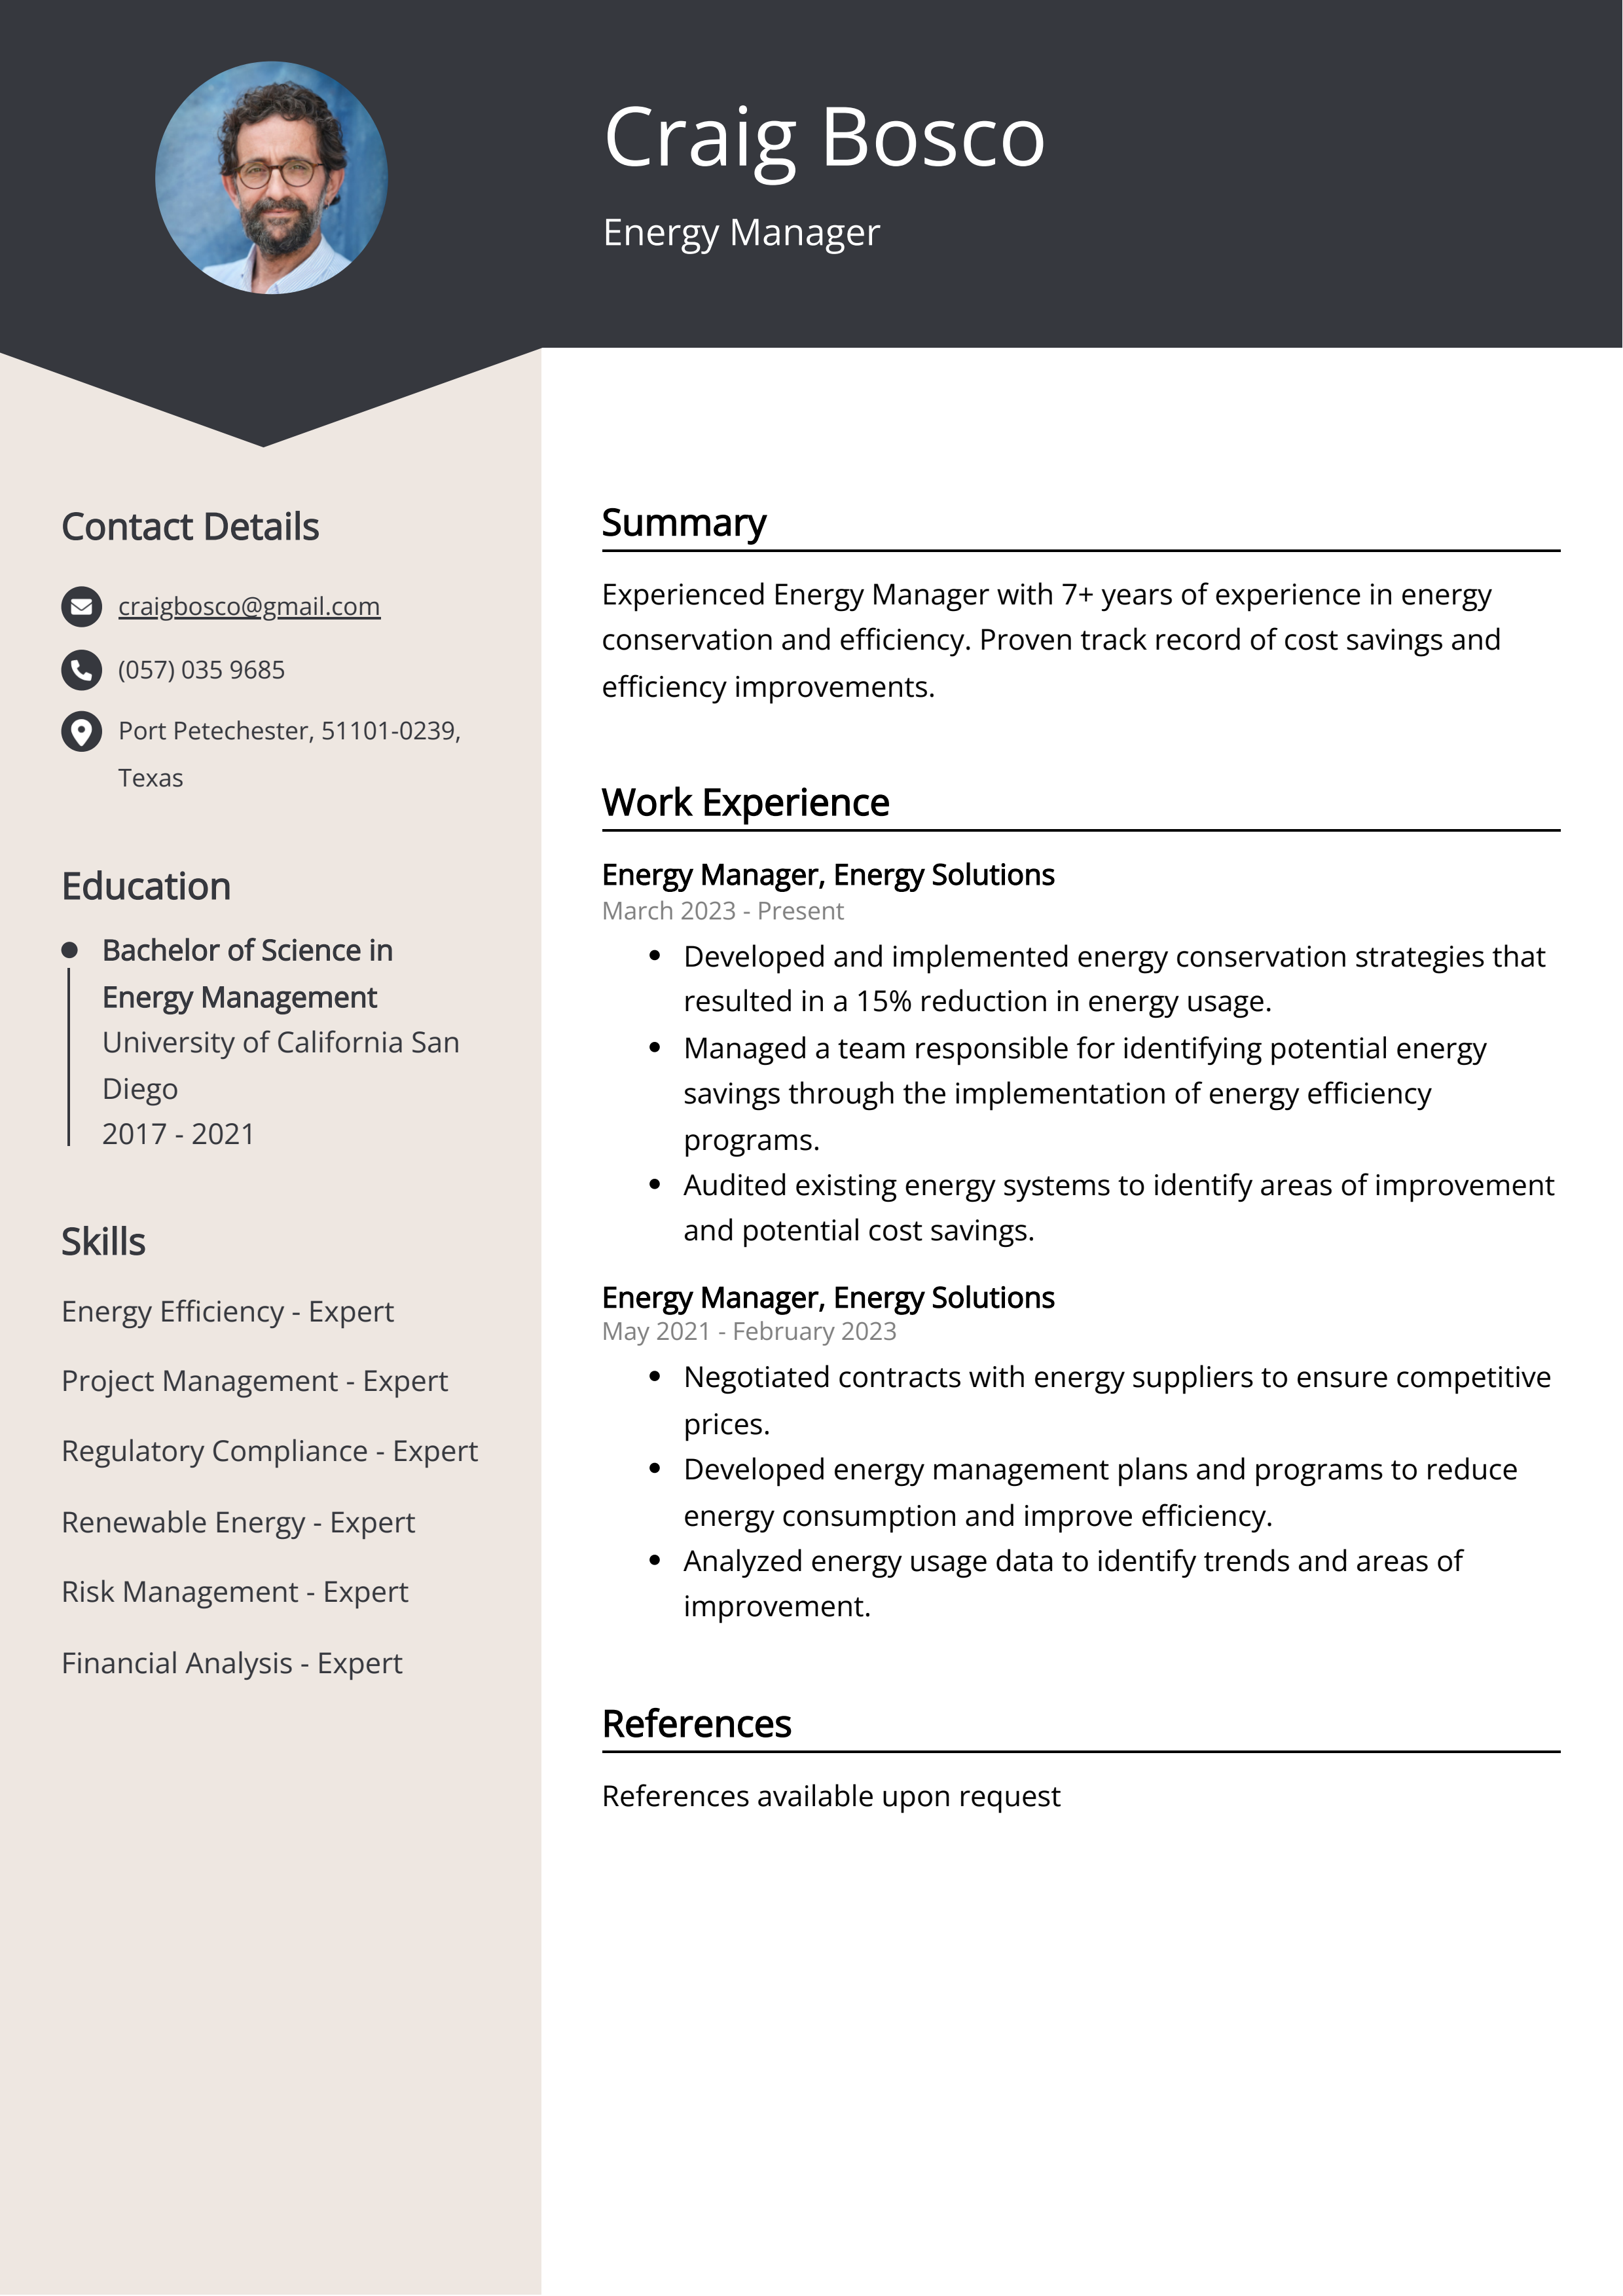 Energy Manager CV Example